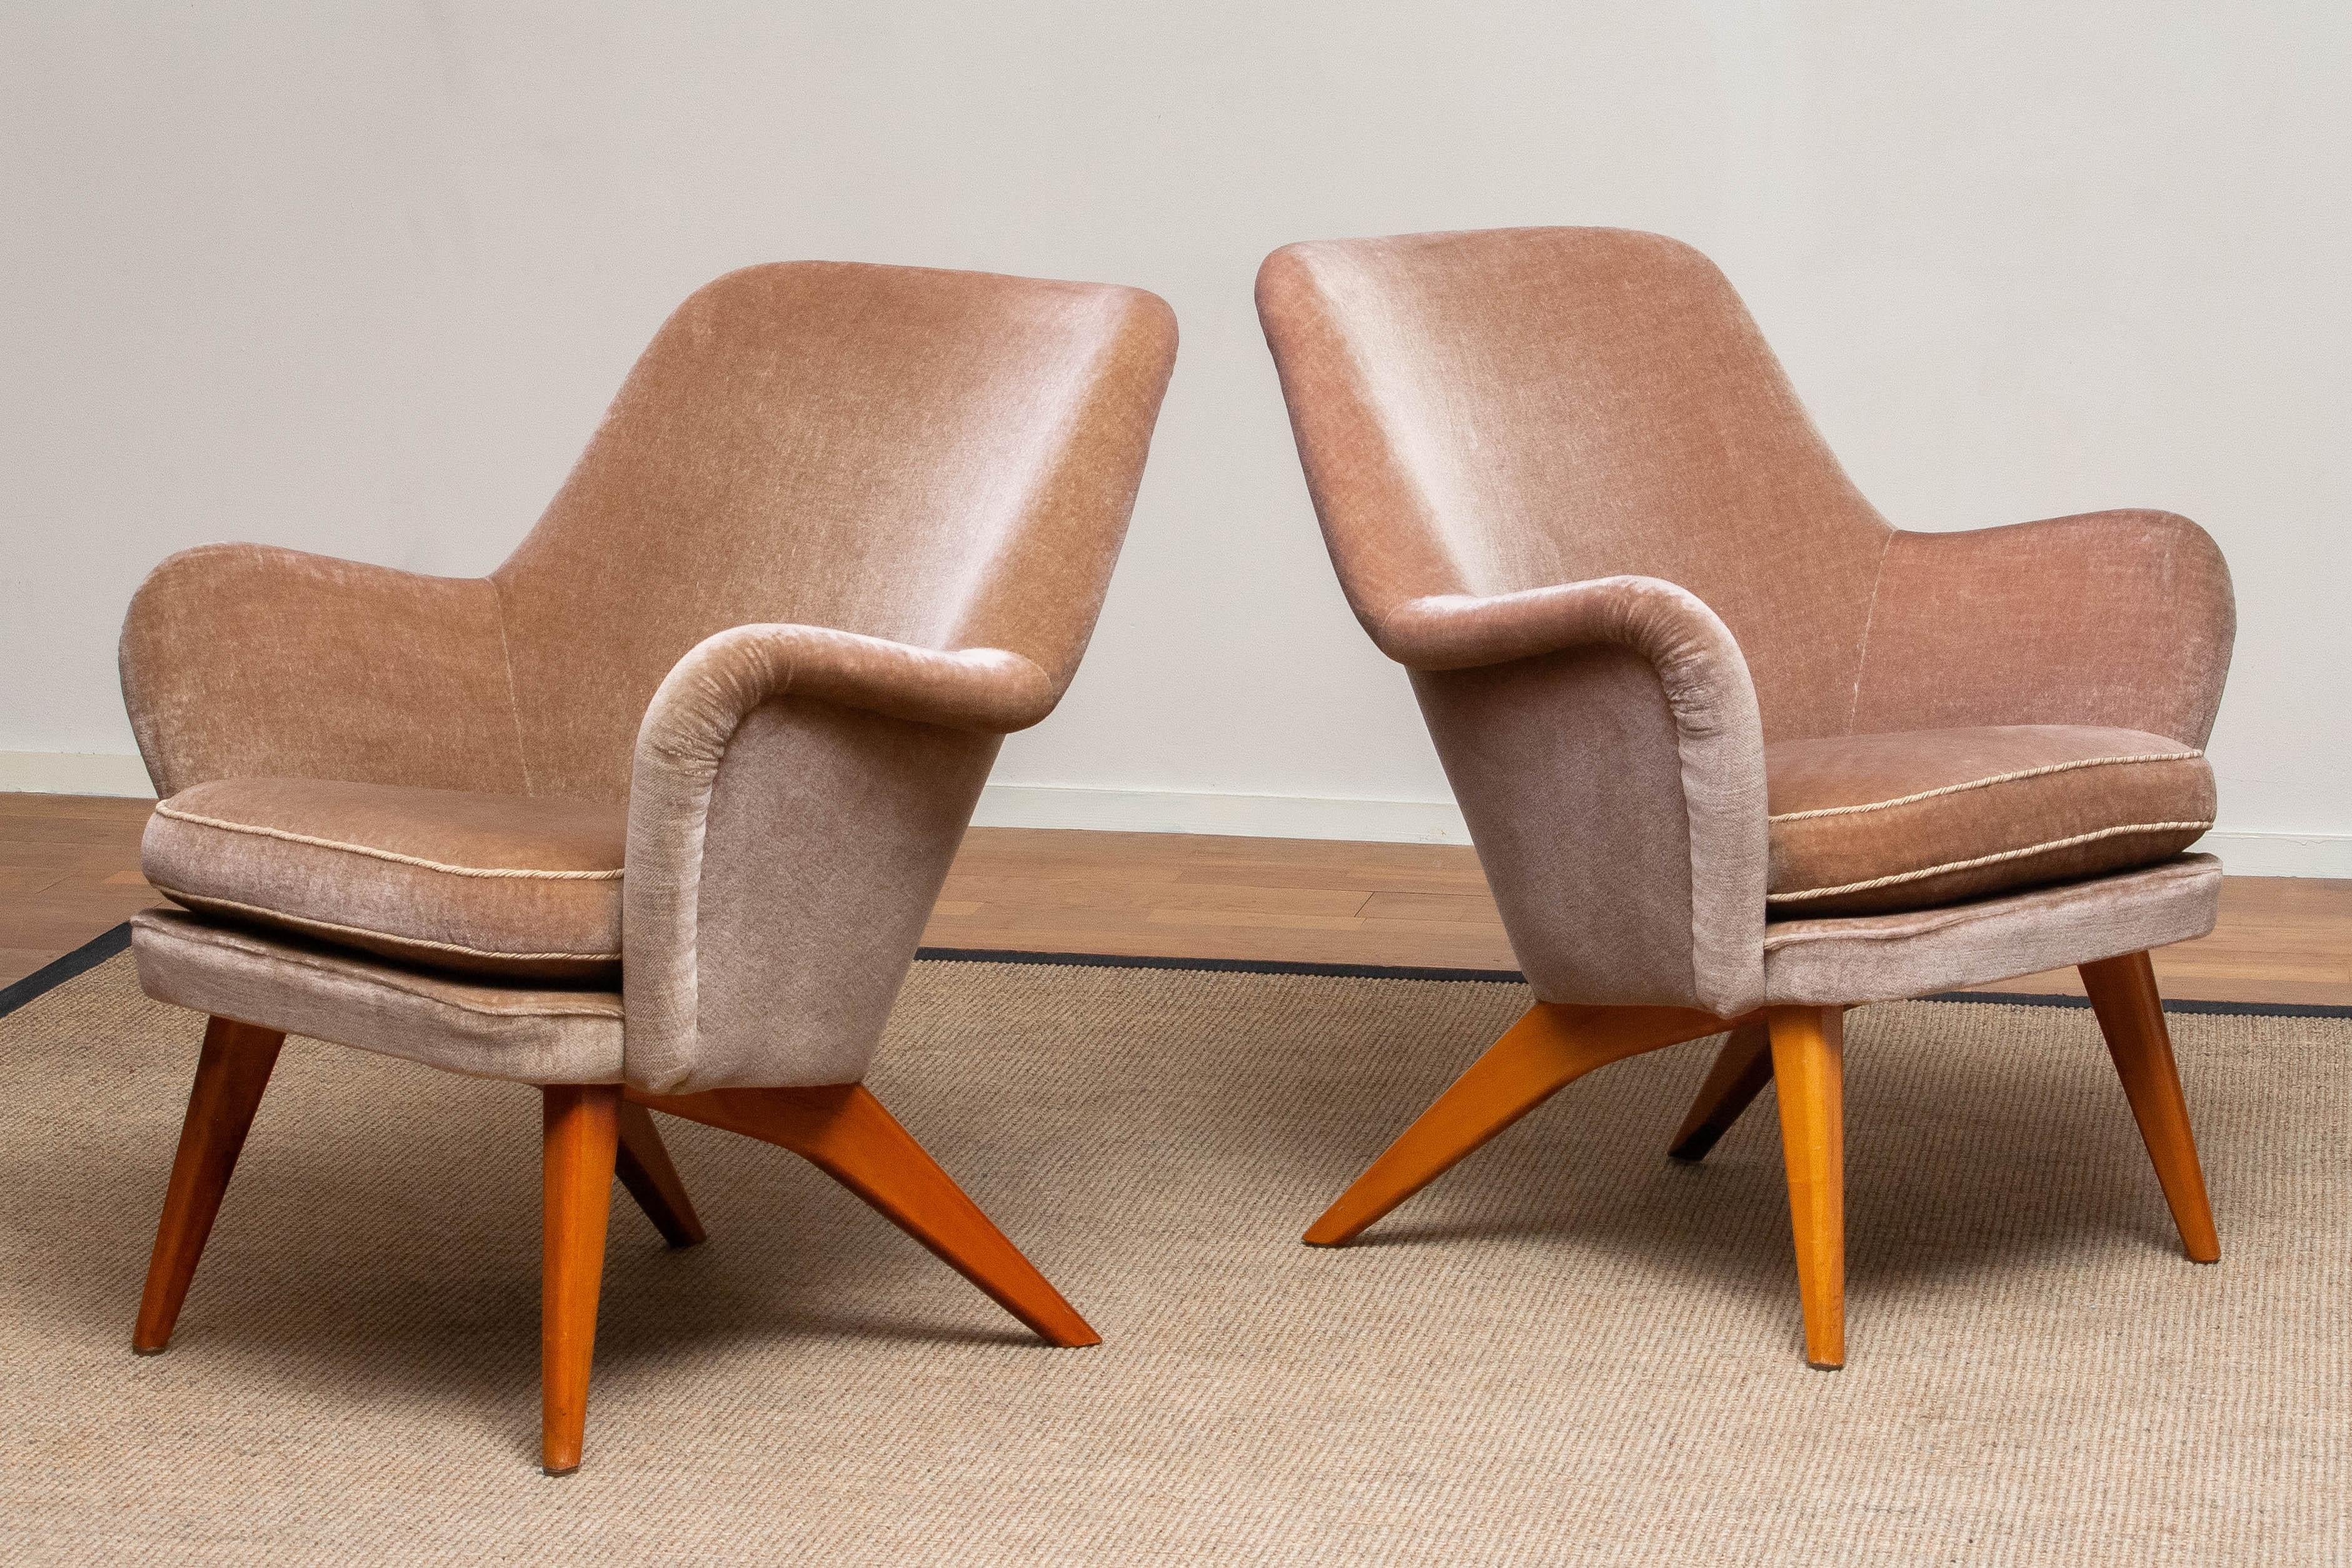 Mid-20th Century 1950s Two Pink Chairs by Carl Gustav Hiort af Ornäs for Puunveisto Oy-Trasnideri